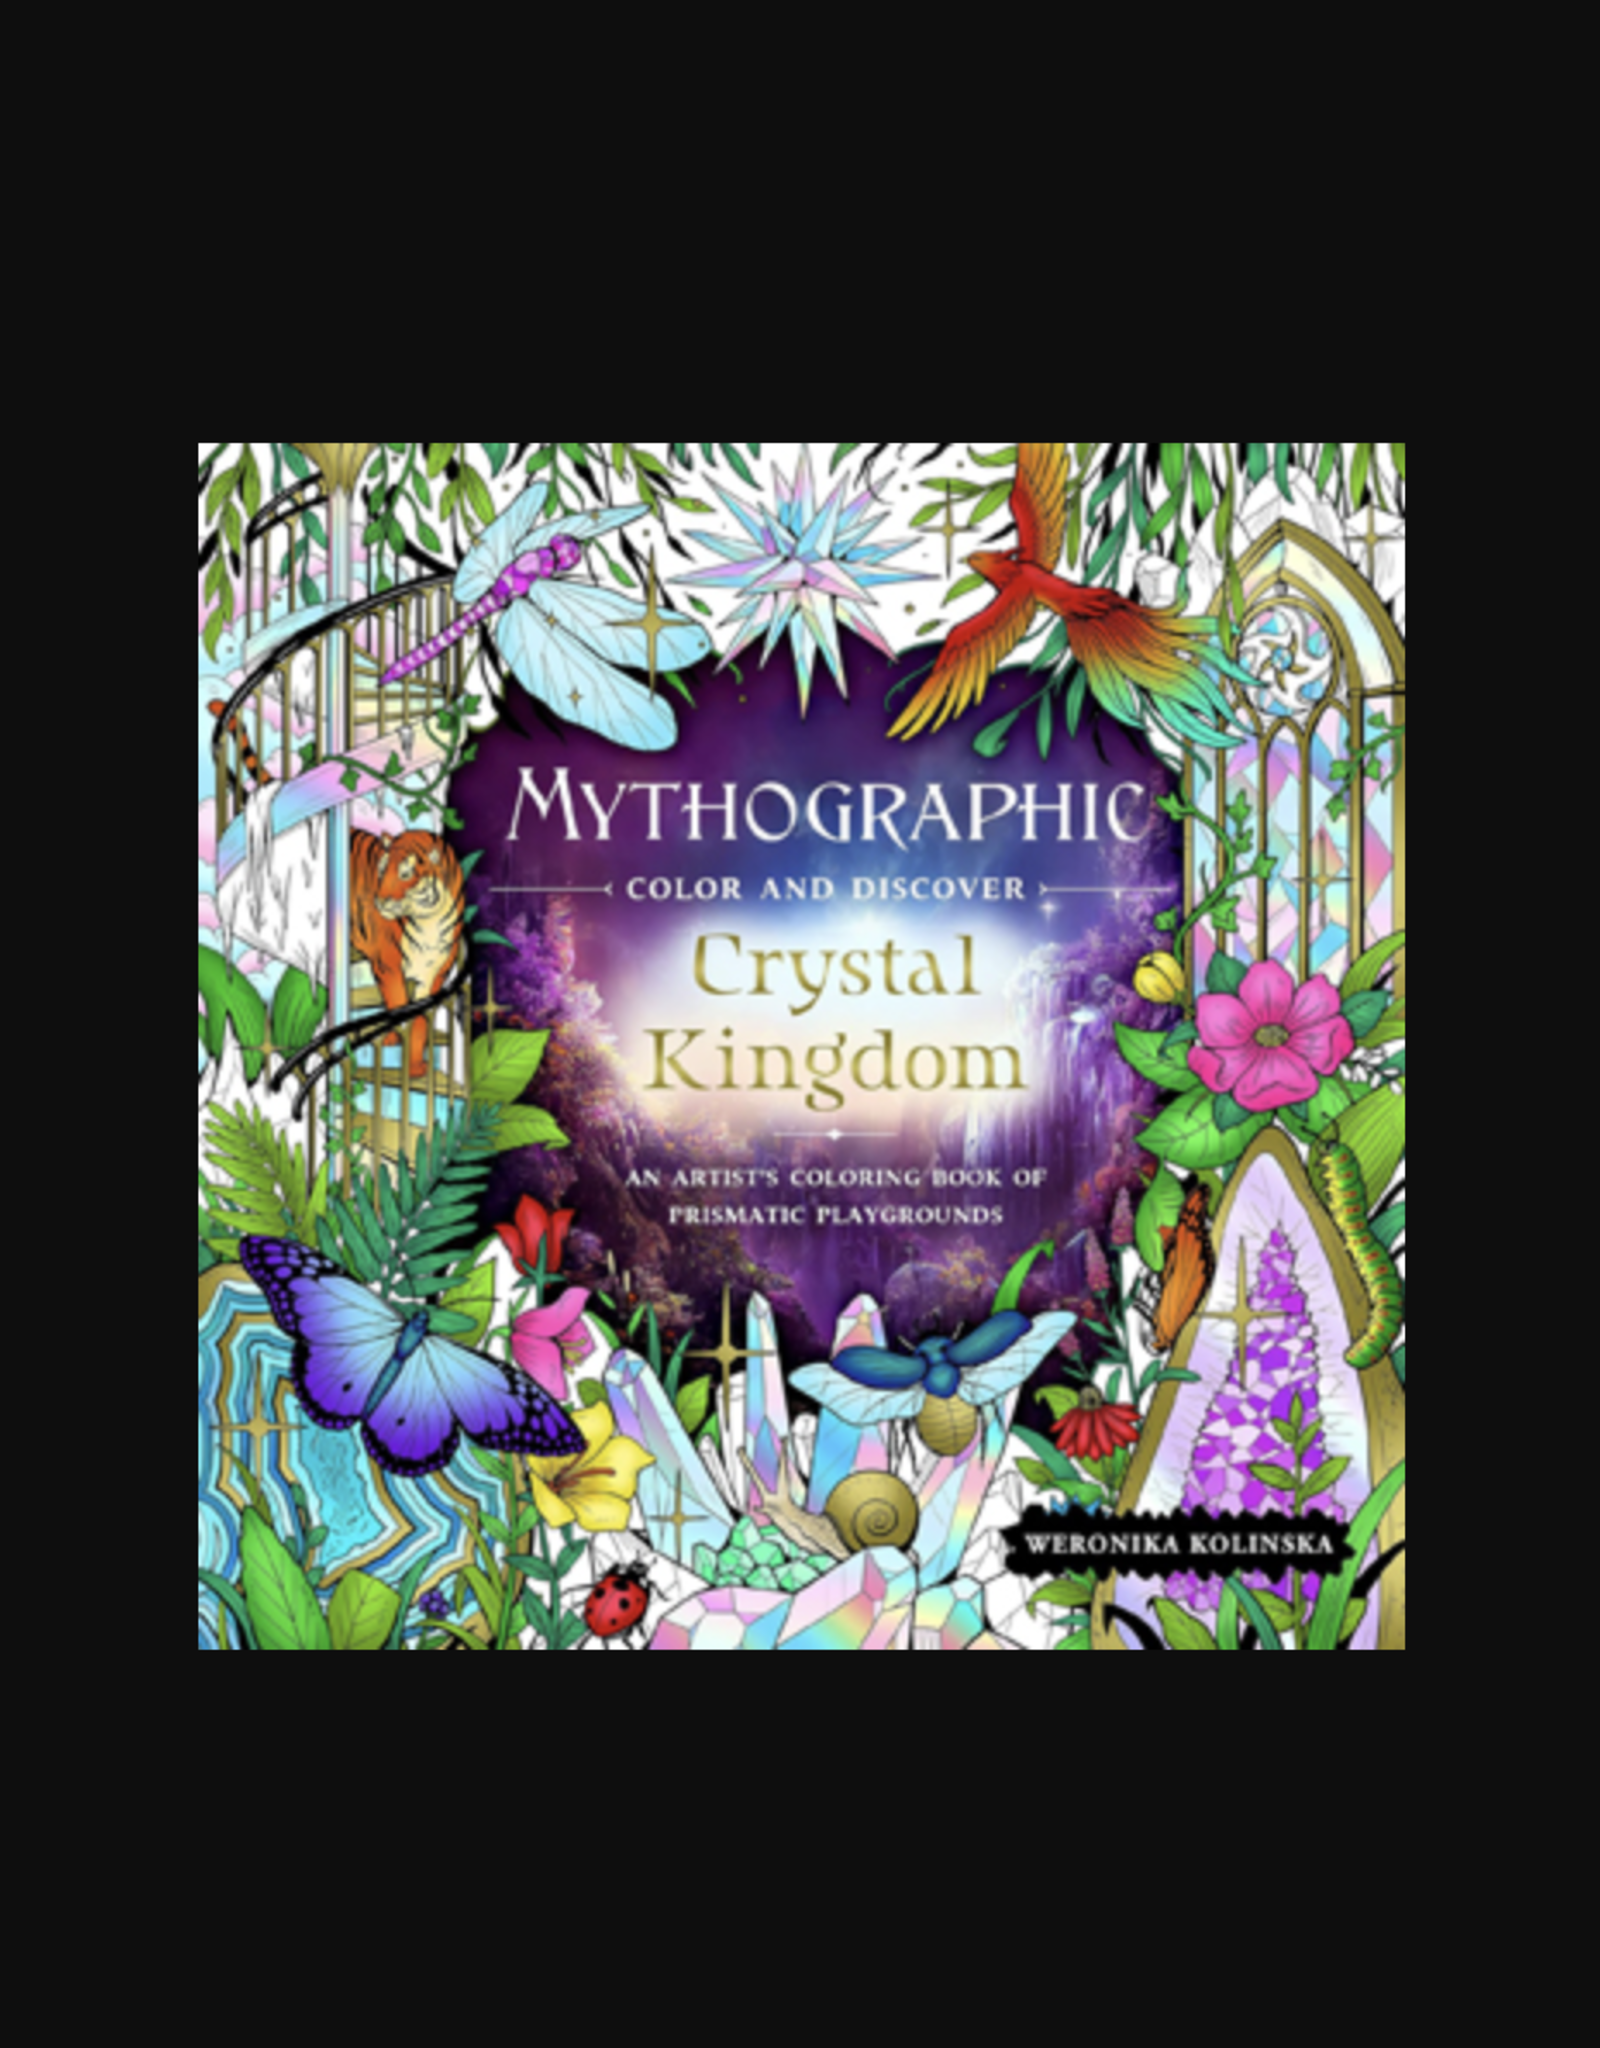 Mythographic Colour and Discover: Crystal Kingdom - An Artist's Colouring Book of Prismatic Playgrounds